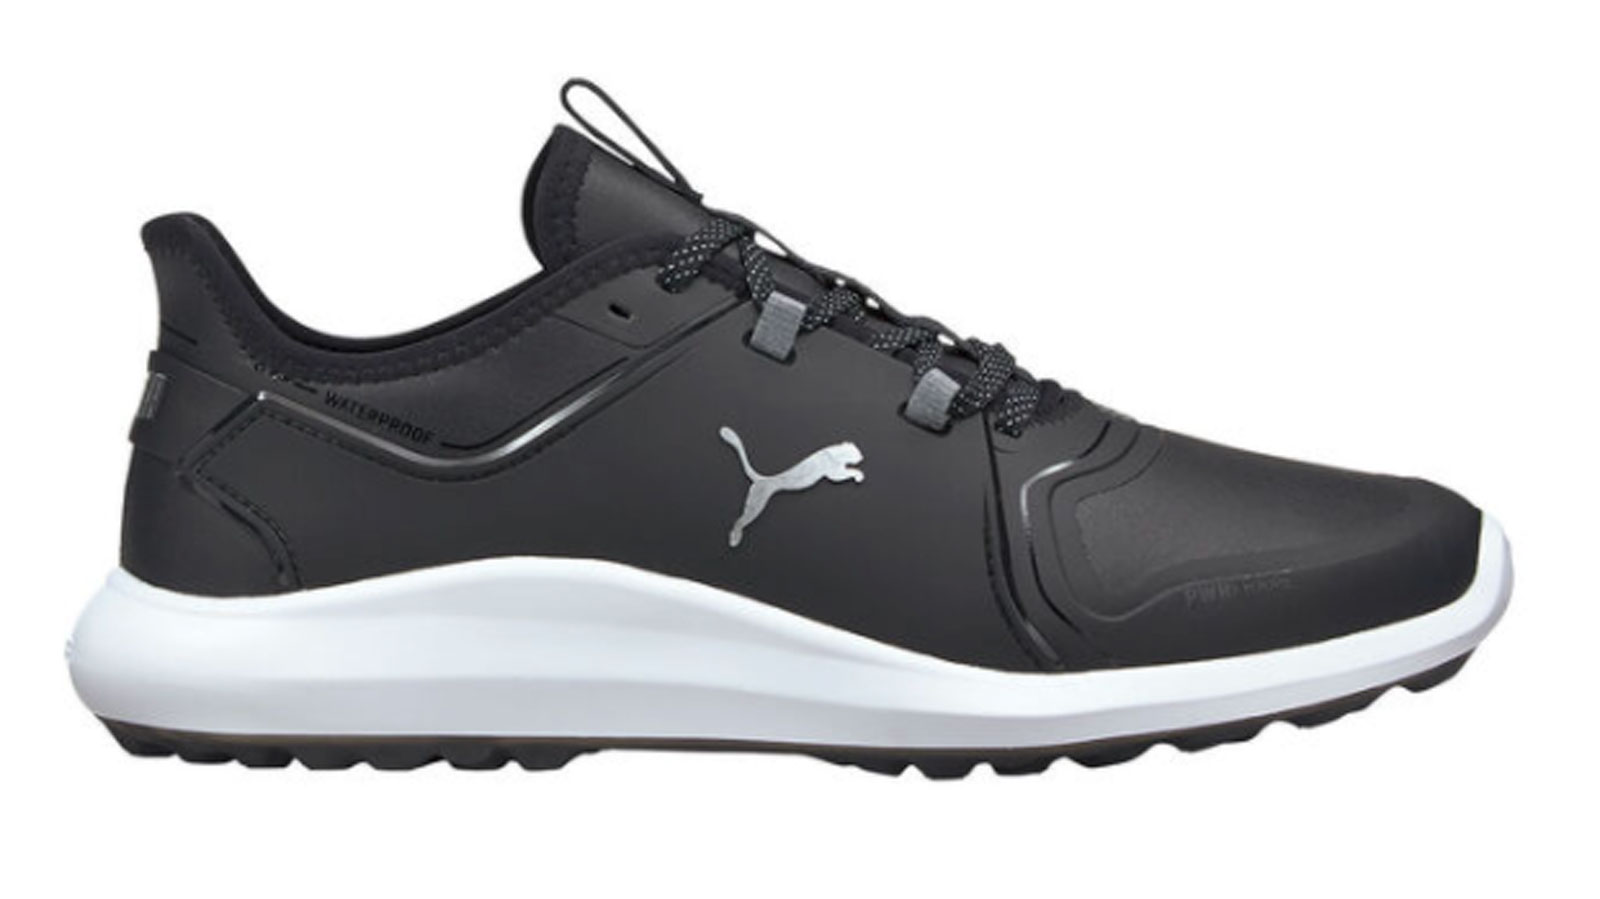 Puma Ignite Fasten8 Pro Golf Shoes Review | Golf Monthly